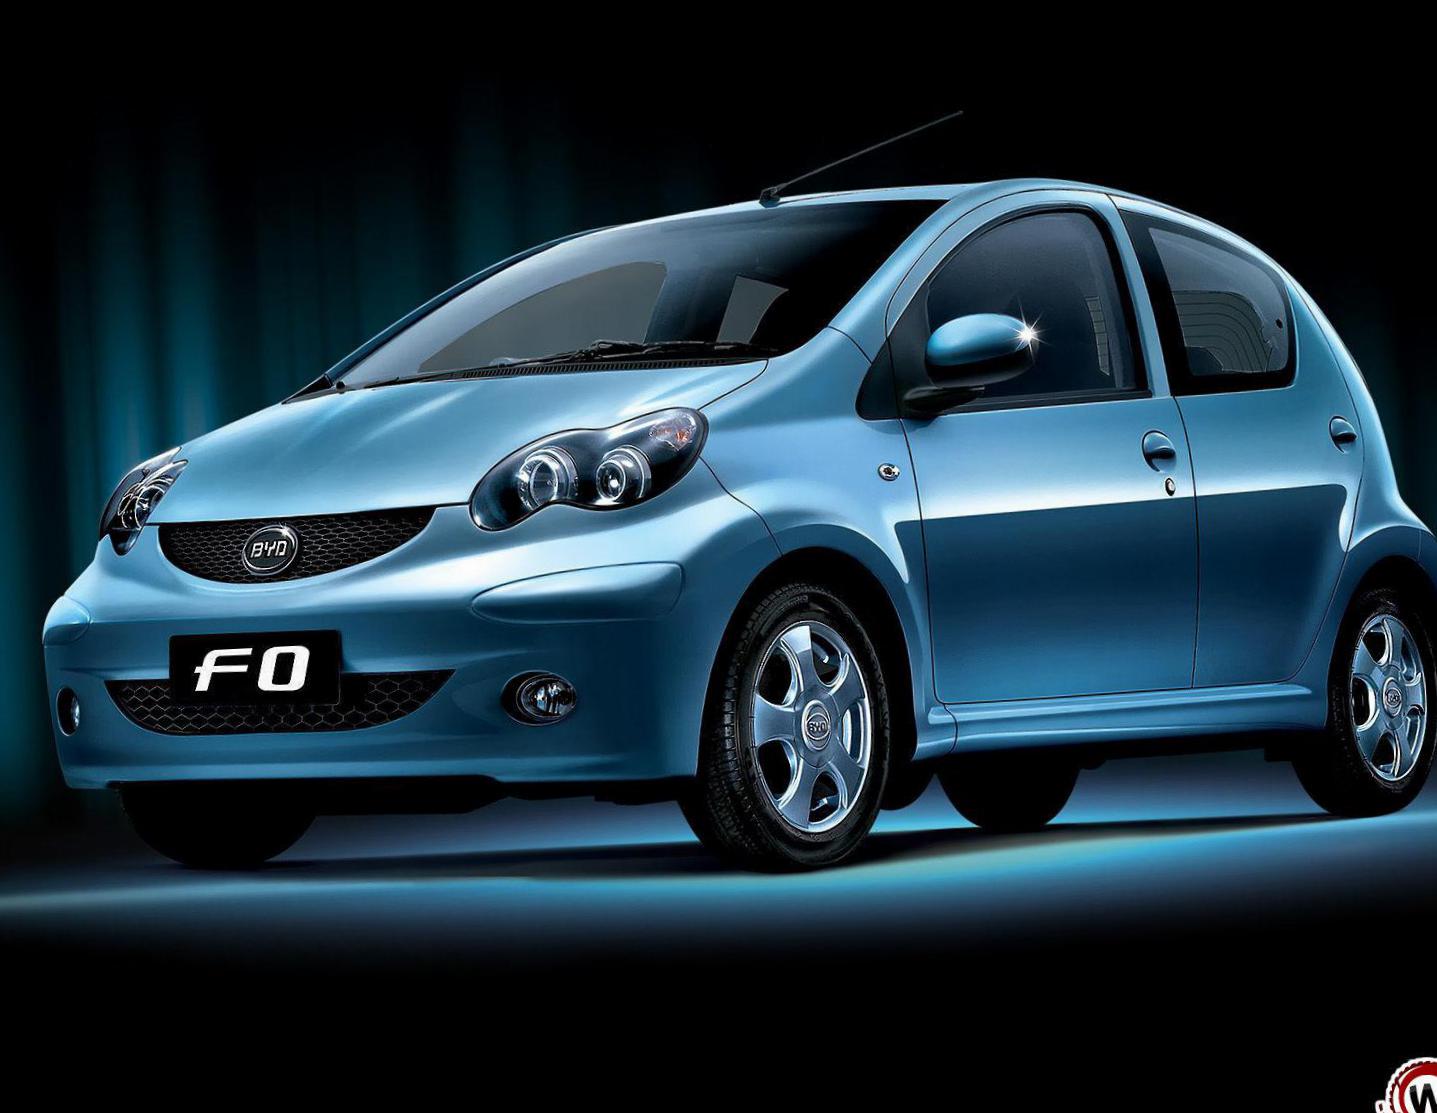 byd-f0-photos-and-specs-photo-byd-f0-auto-and-22-perfect-photos-of-byd-f0